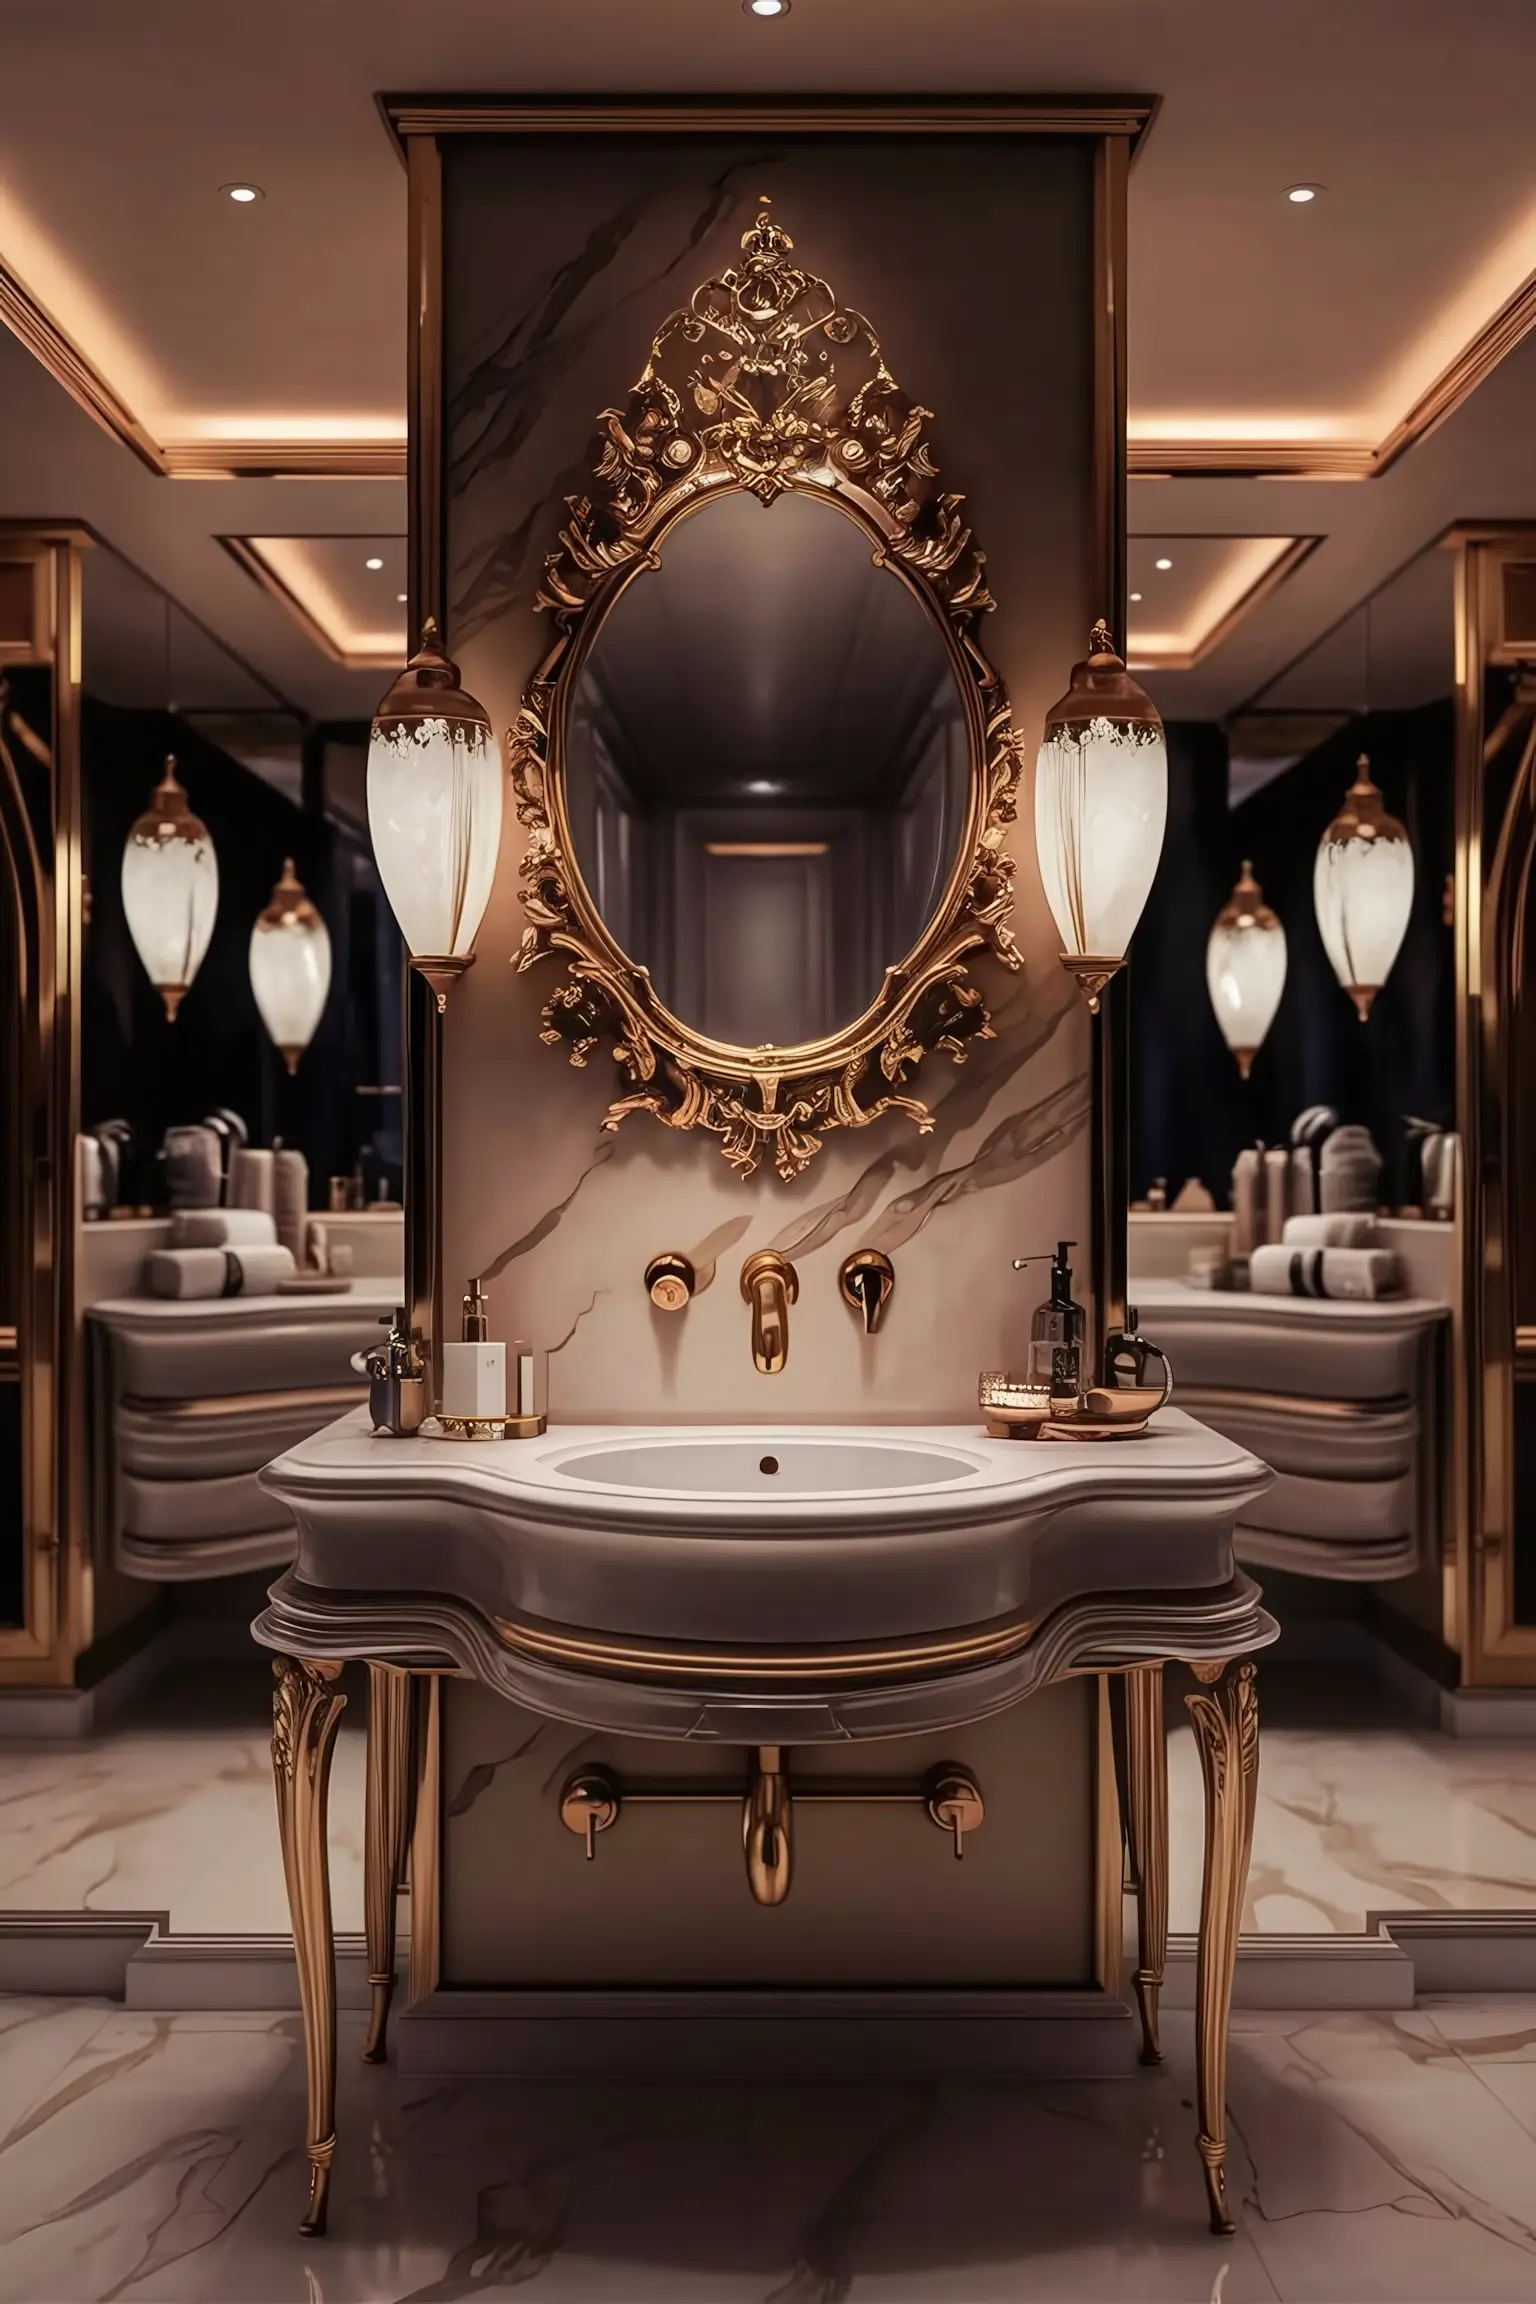 Small luxury bathroom with elegant decor, including a chic vanity and stylish mirror.